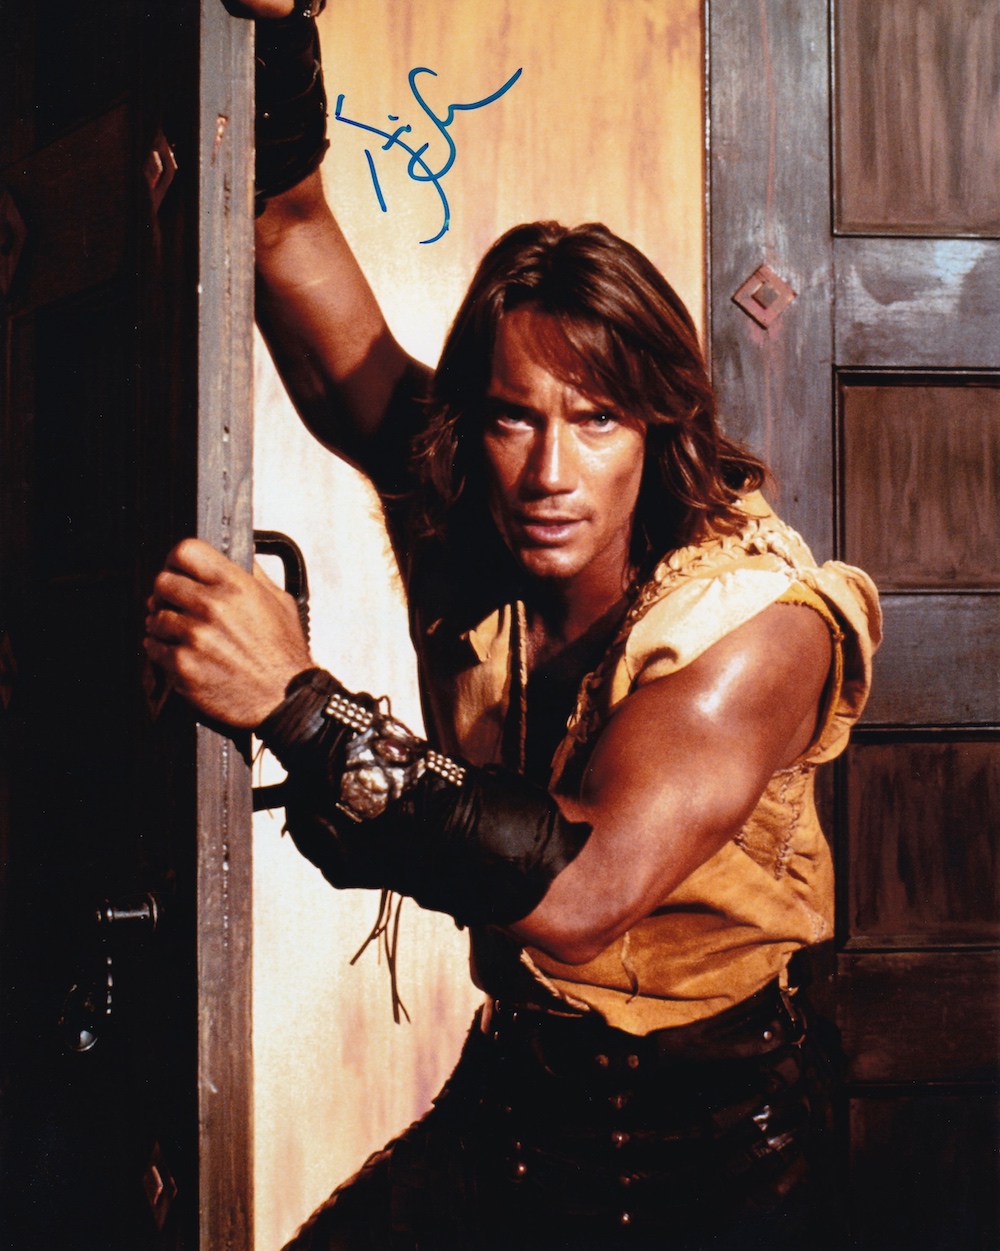 Kevin Sorbo Hercules Actor 10x8 inch Signed Photo. Good condition. All autographs come with a